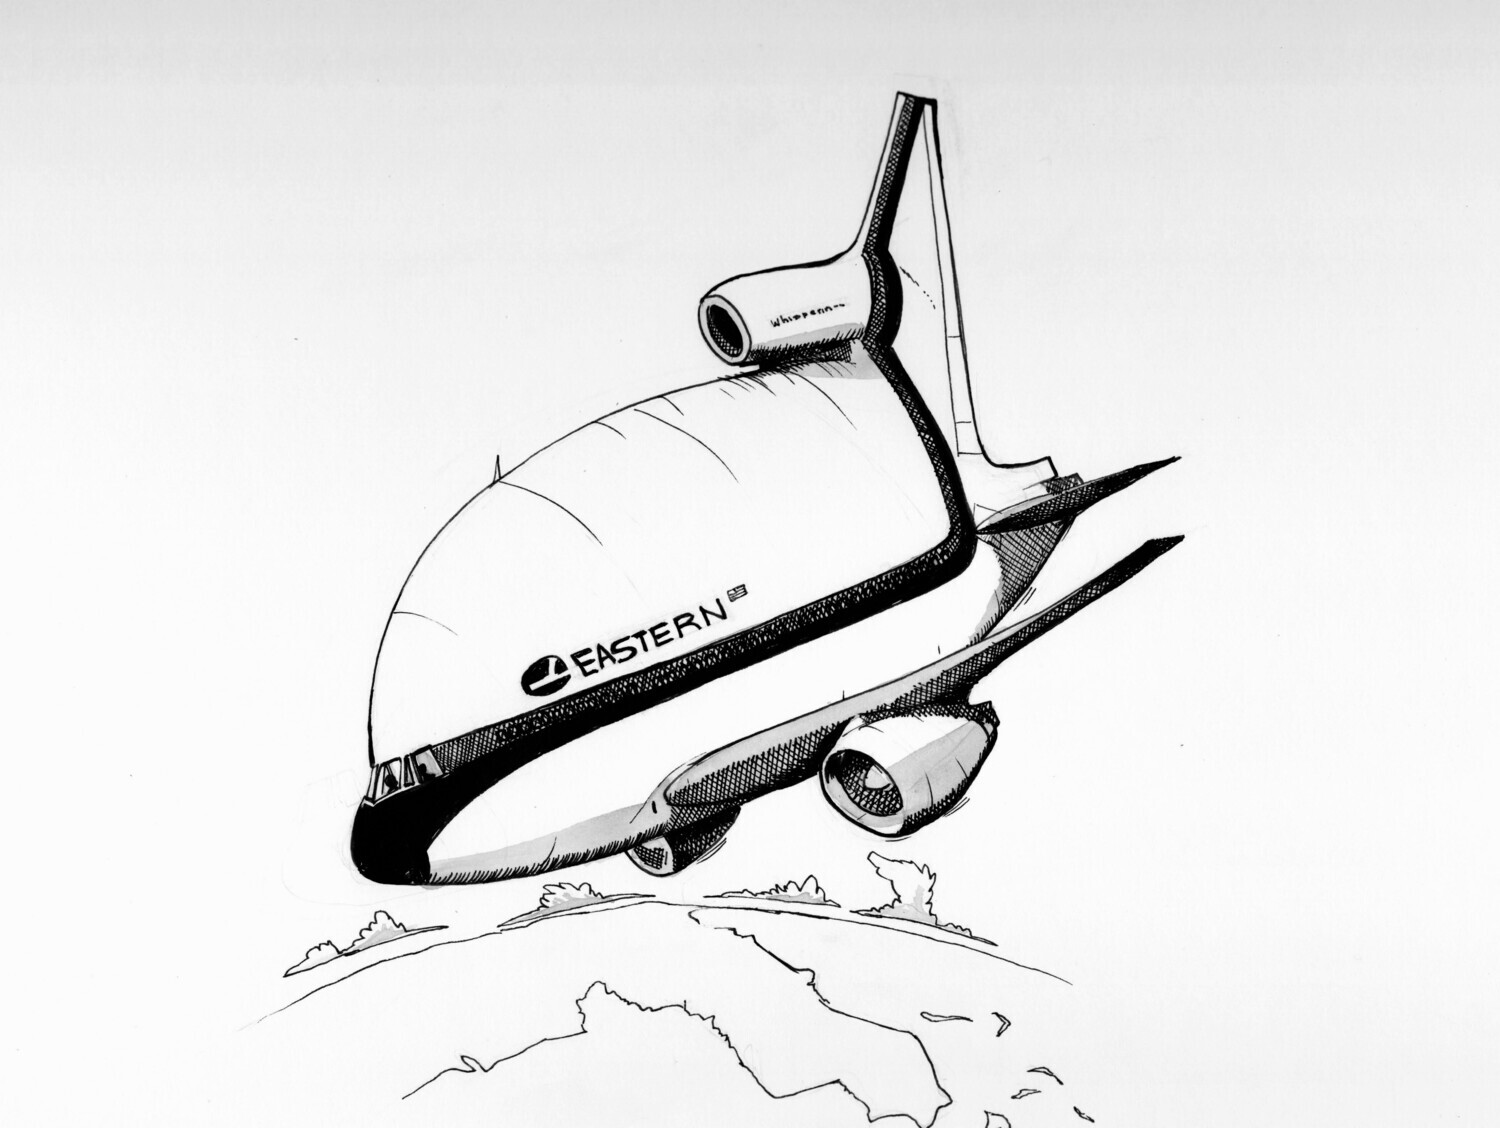 Eastern Airlines L-1011 - Original 12"x 16" Aviation Caricature by Michael Hopkins.